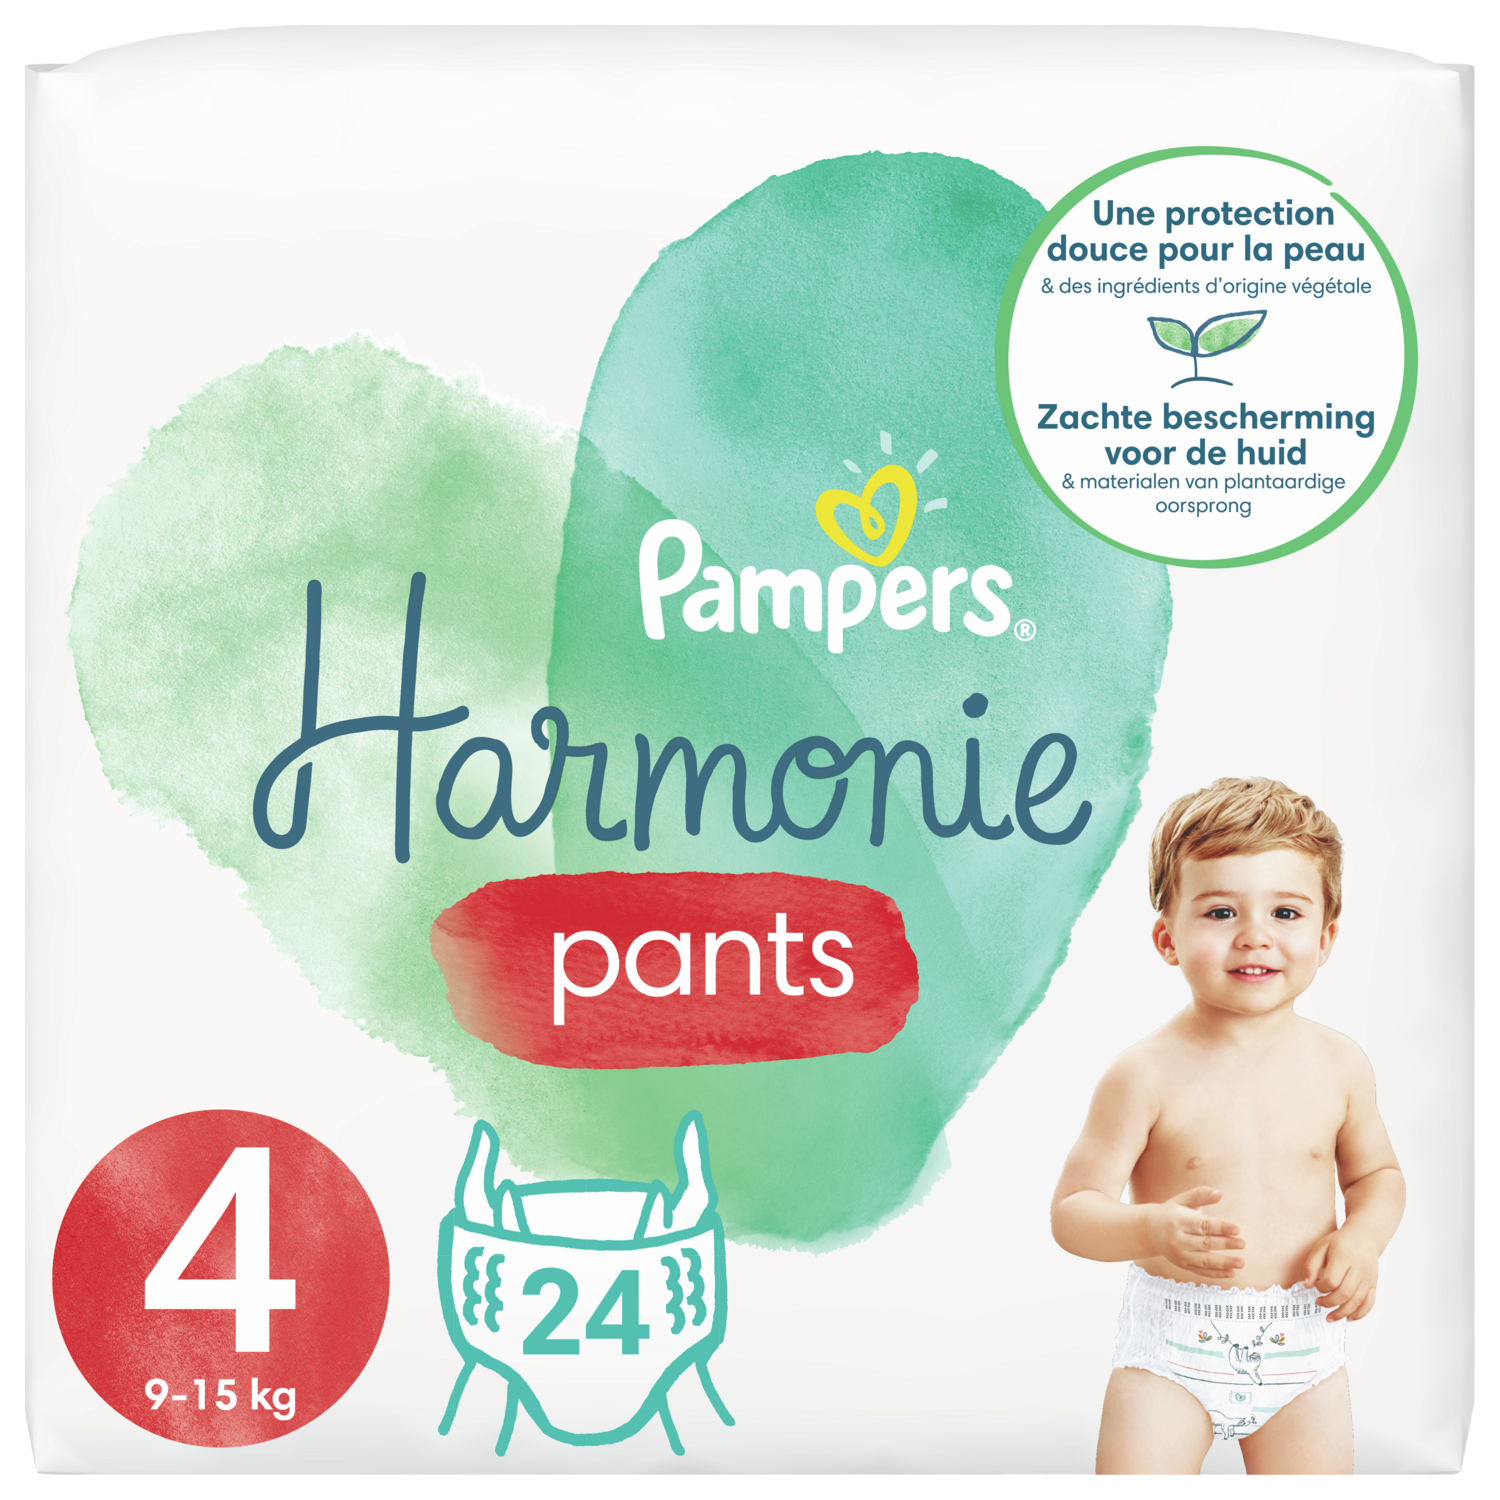 PAMPERS Harmonie pants couches culottes taille 4 (9-15kg) 24 culottes pas  cher 